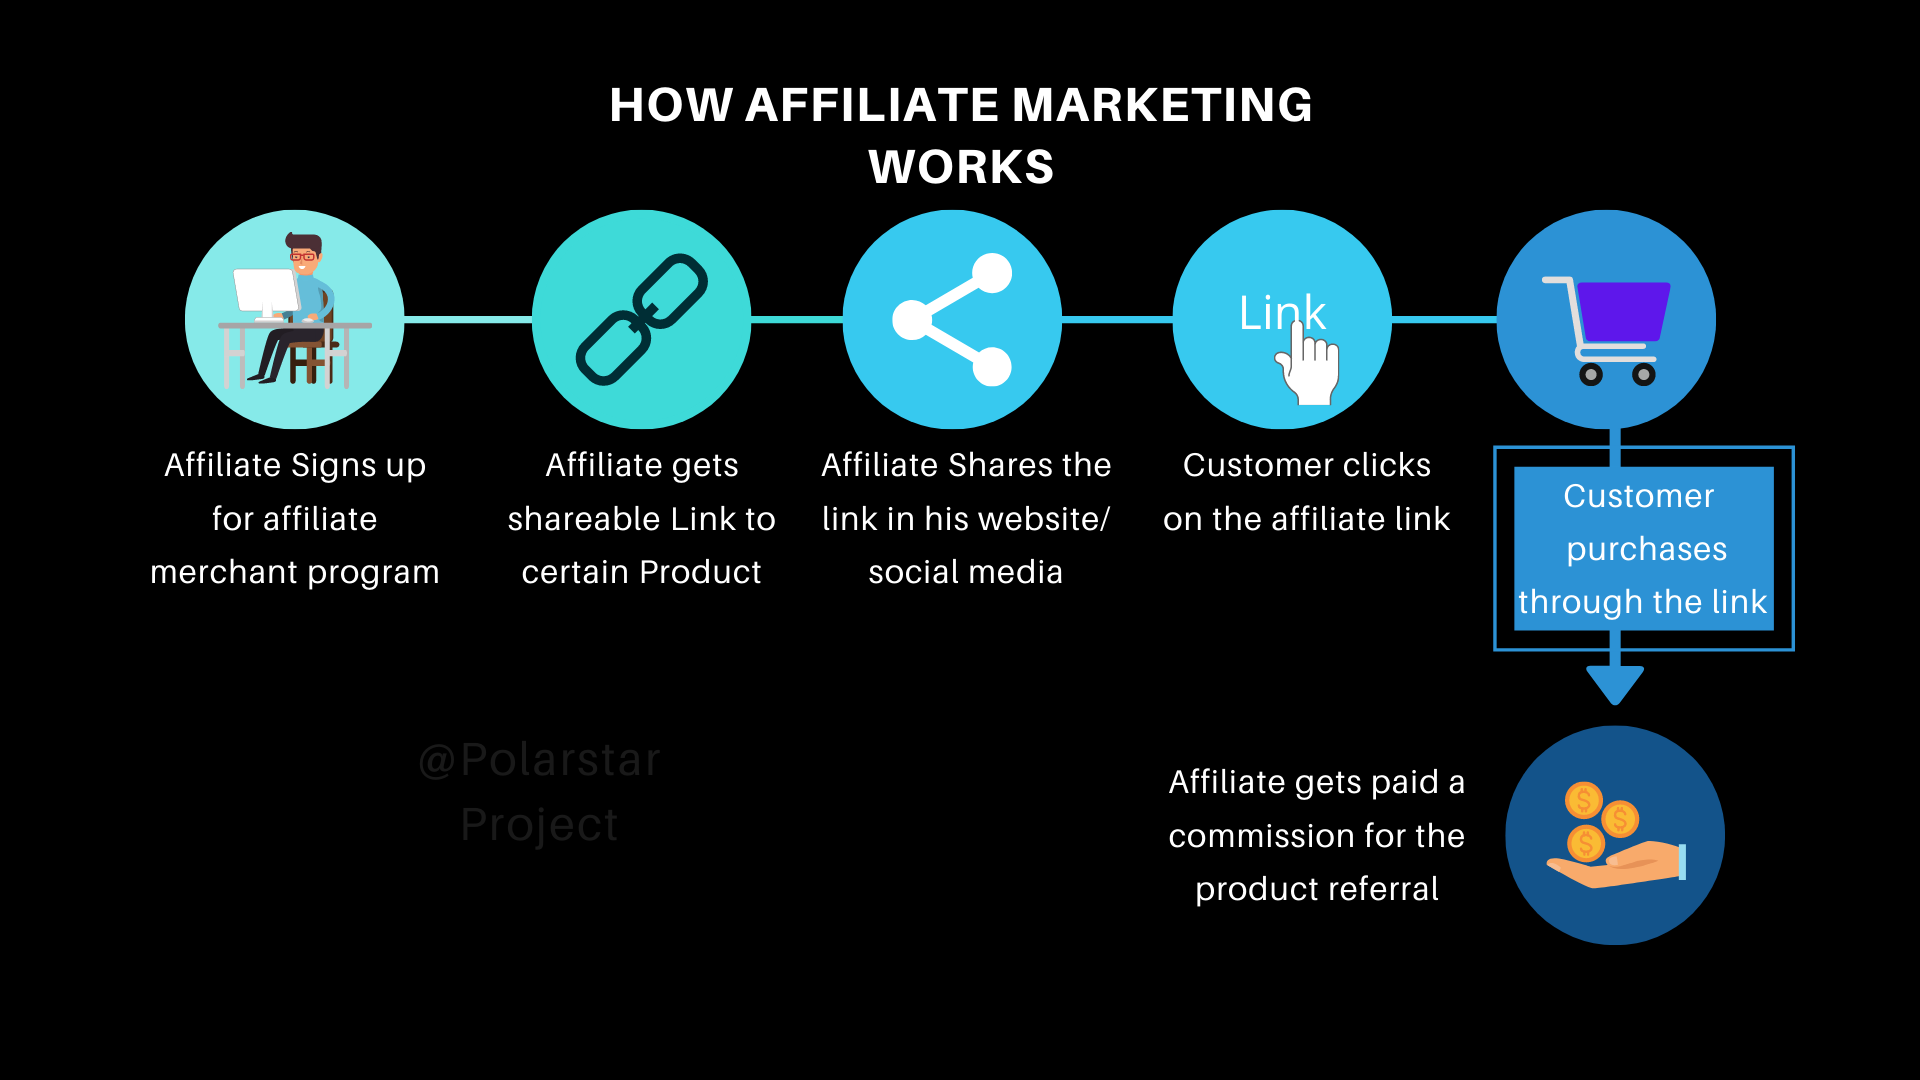 Is affiliate marketing worth it for your business as a self-employed person?